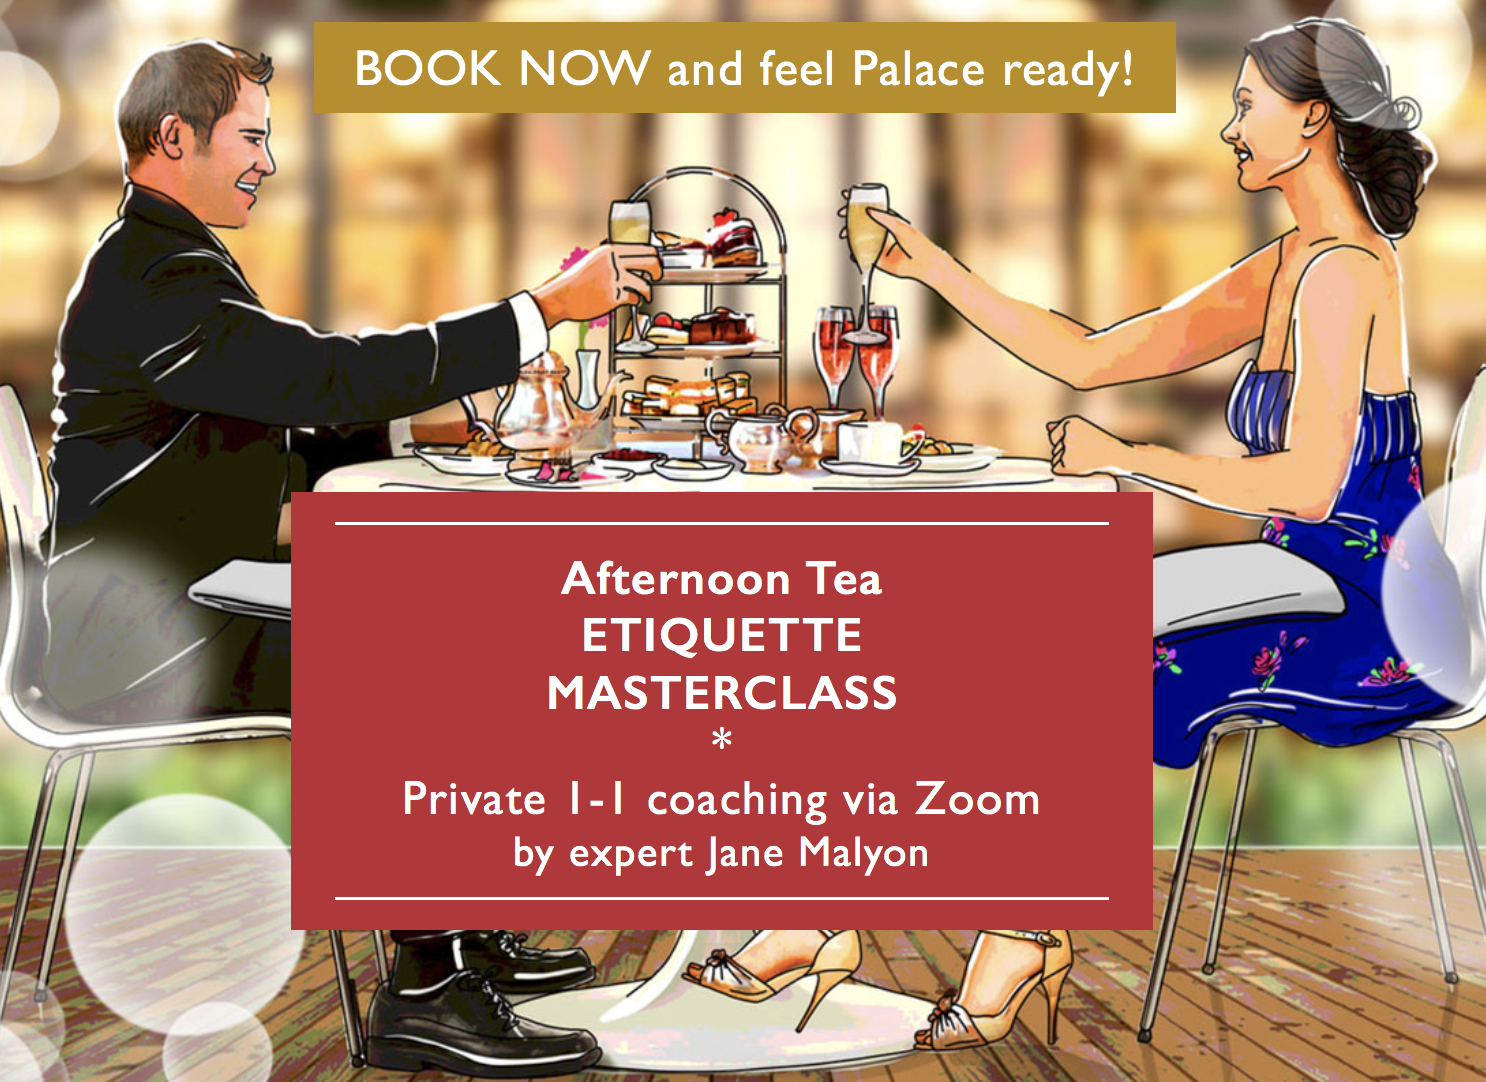 Image for afternoon tea masterclass by Jane Malyon